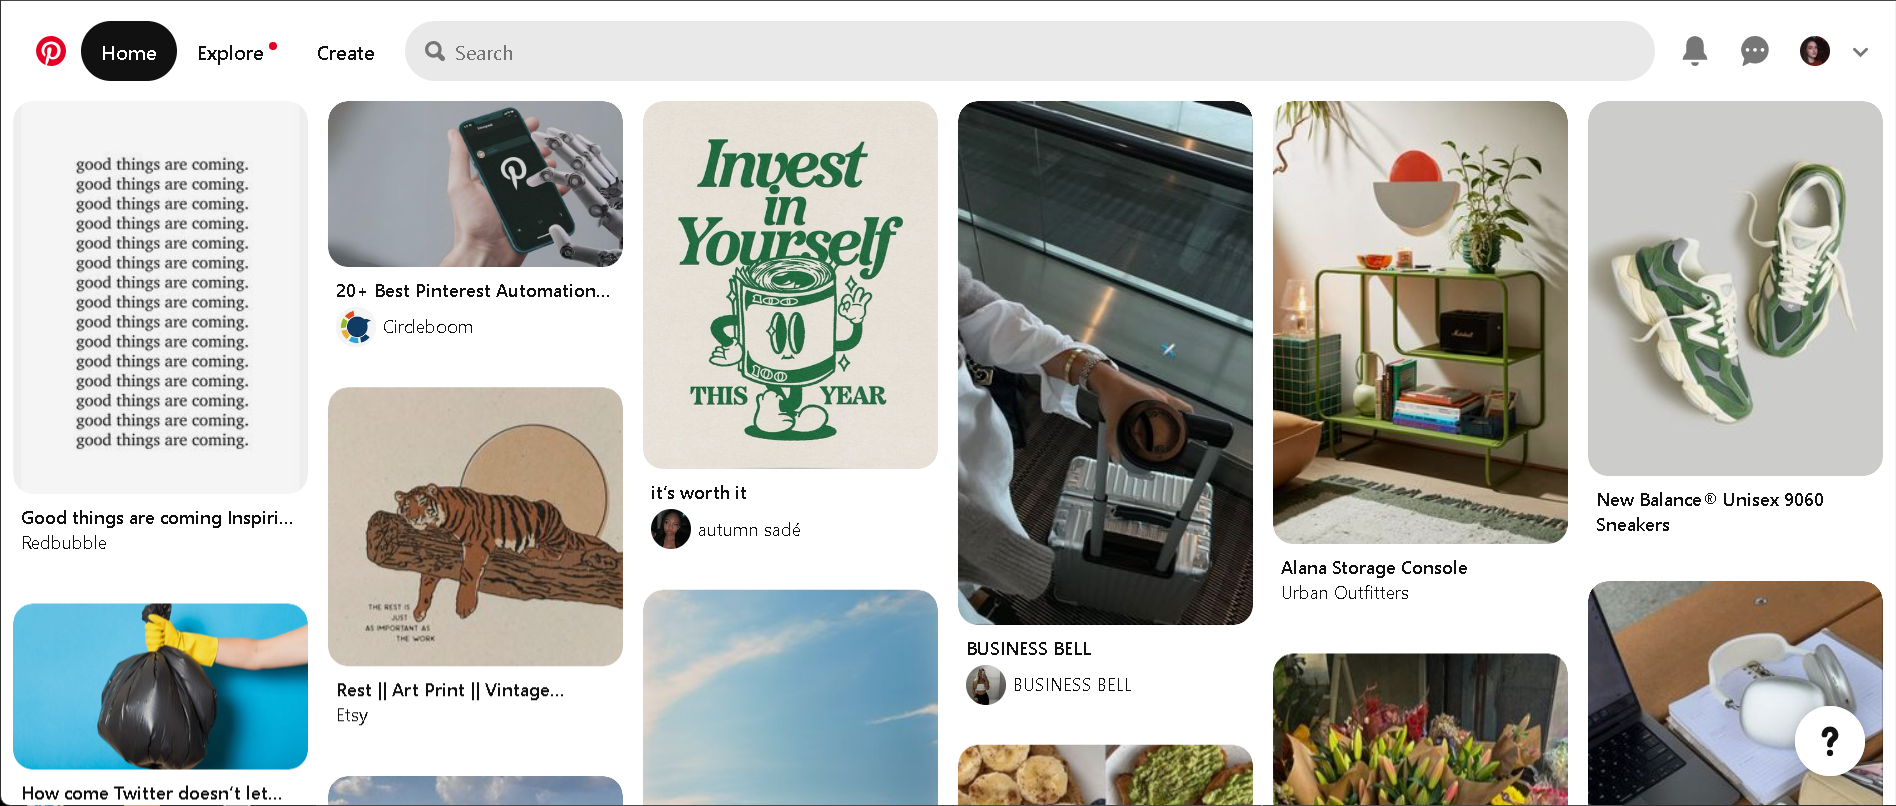 Does Pinterest have an algorithm? Of course it does!